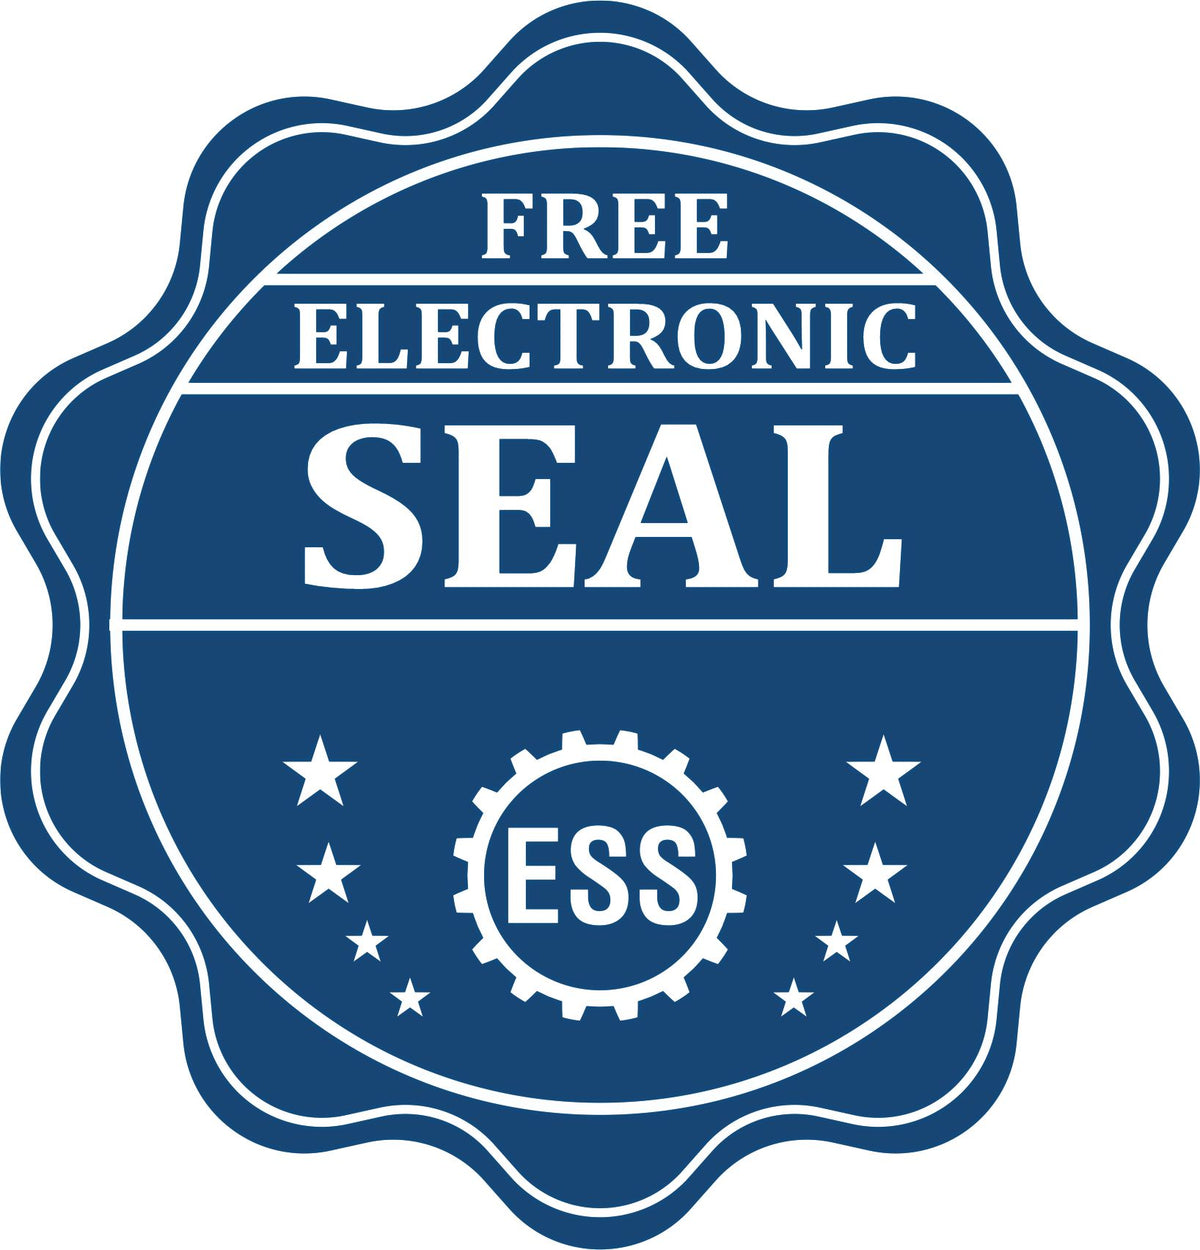 A badge showing a free electronic seal for the State of Connecticut Extended Long Reach Geologist Seal with stars and the ESS gear on the emblem.